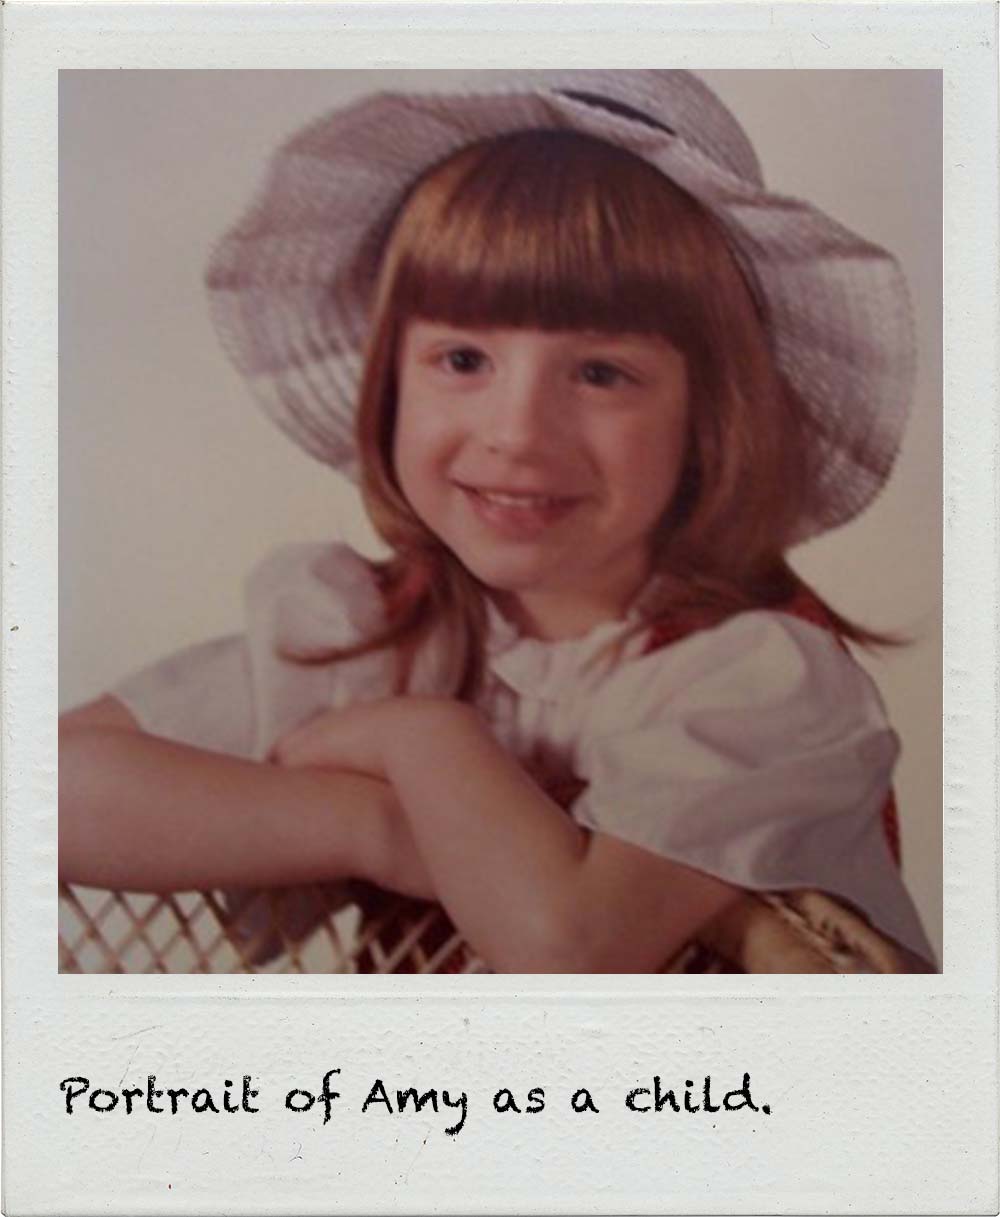 Portrait of Amy as a child.